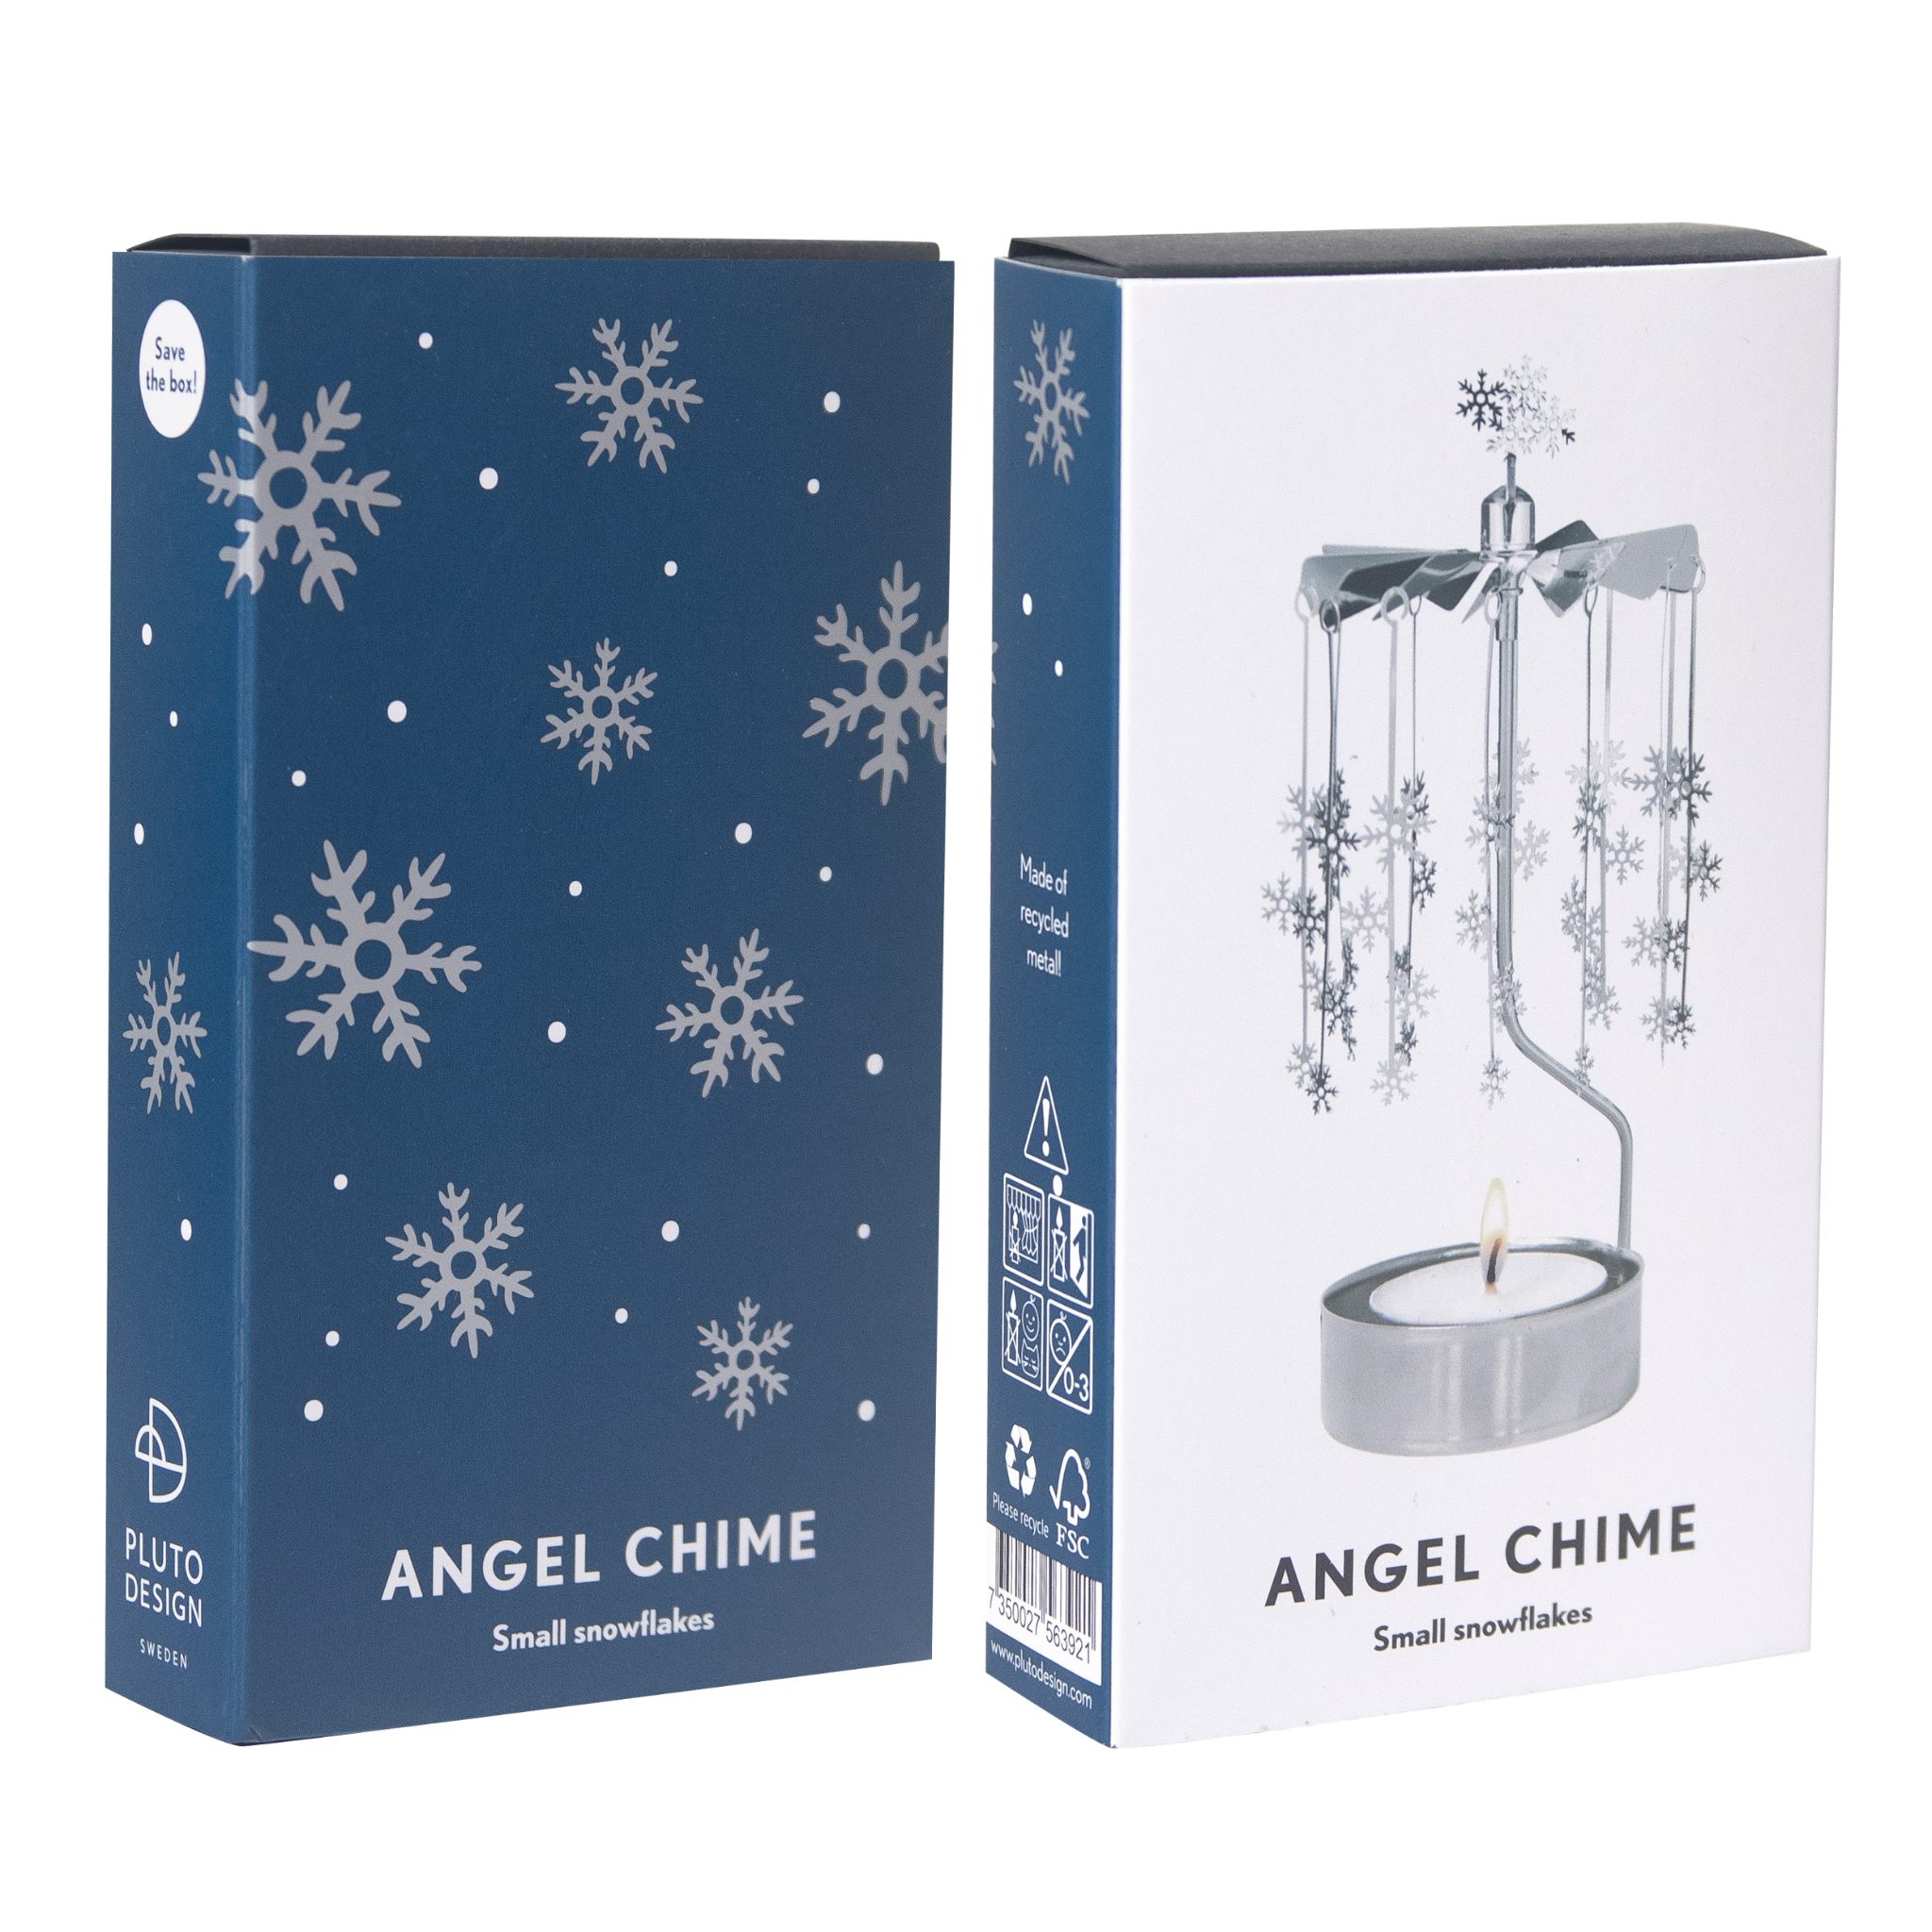 angel chime small snowflakes